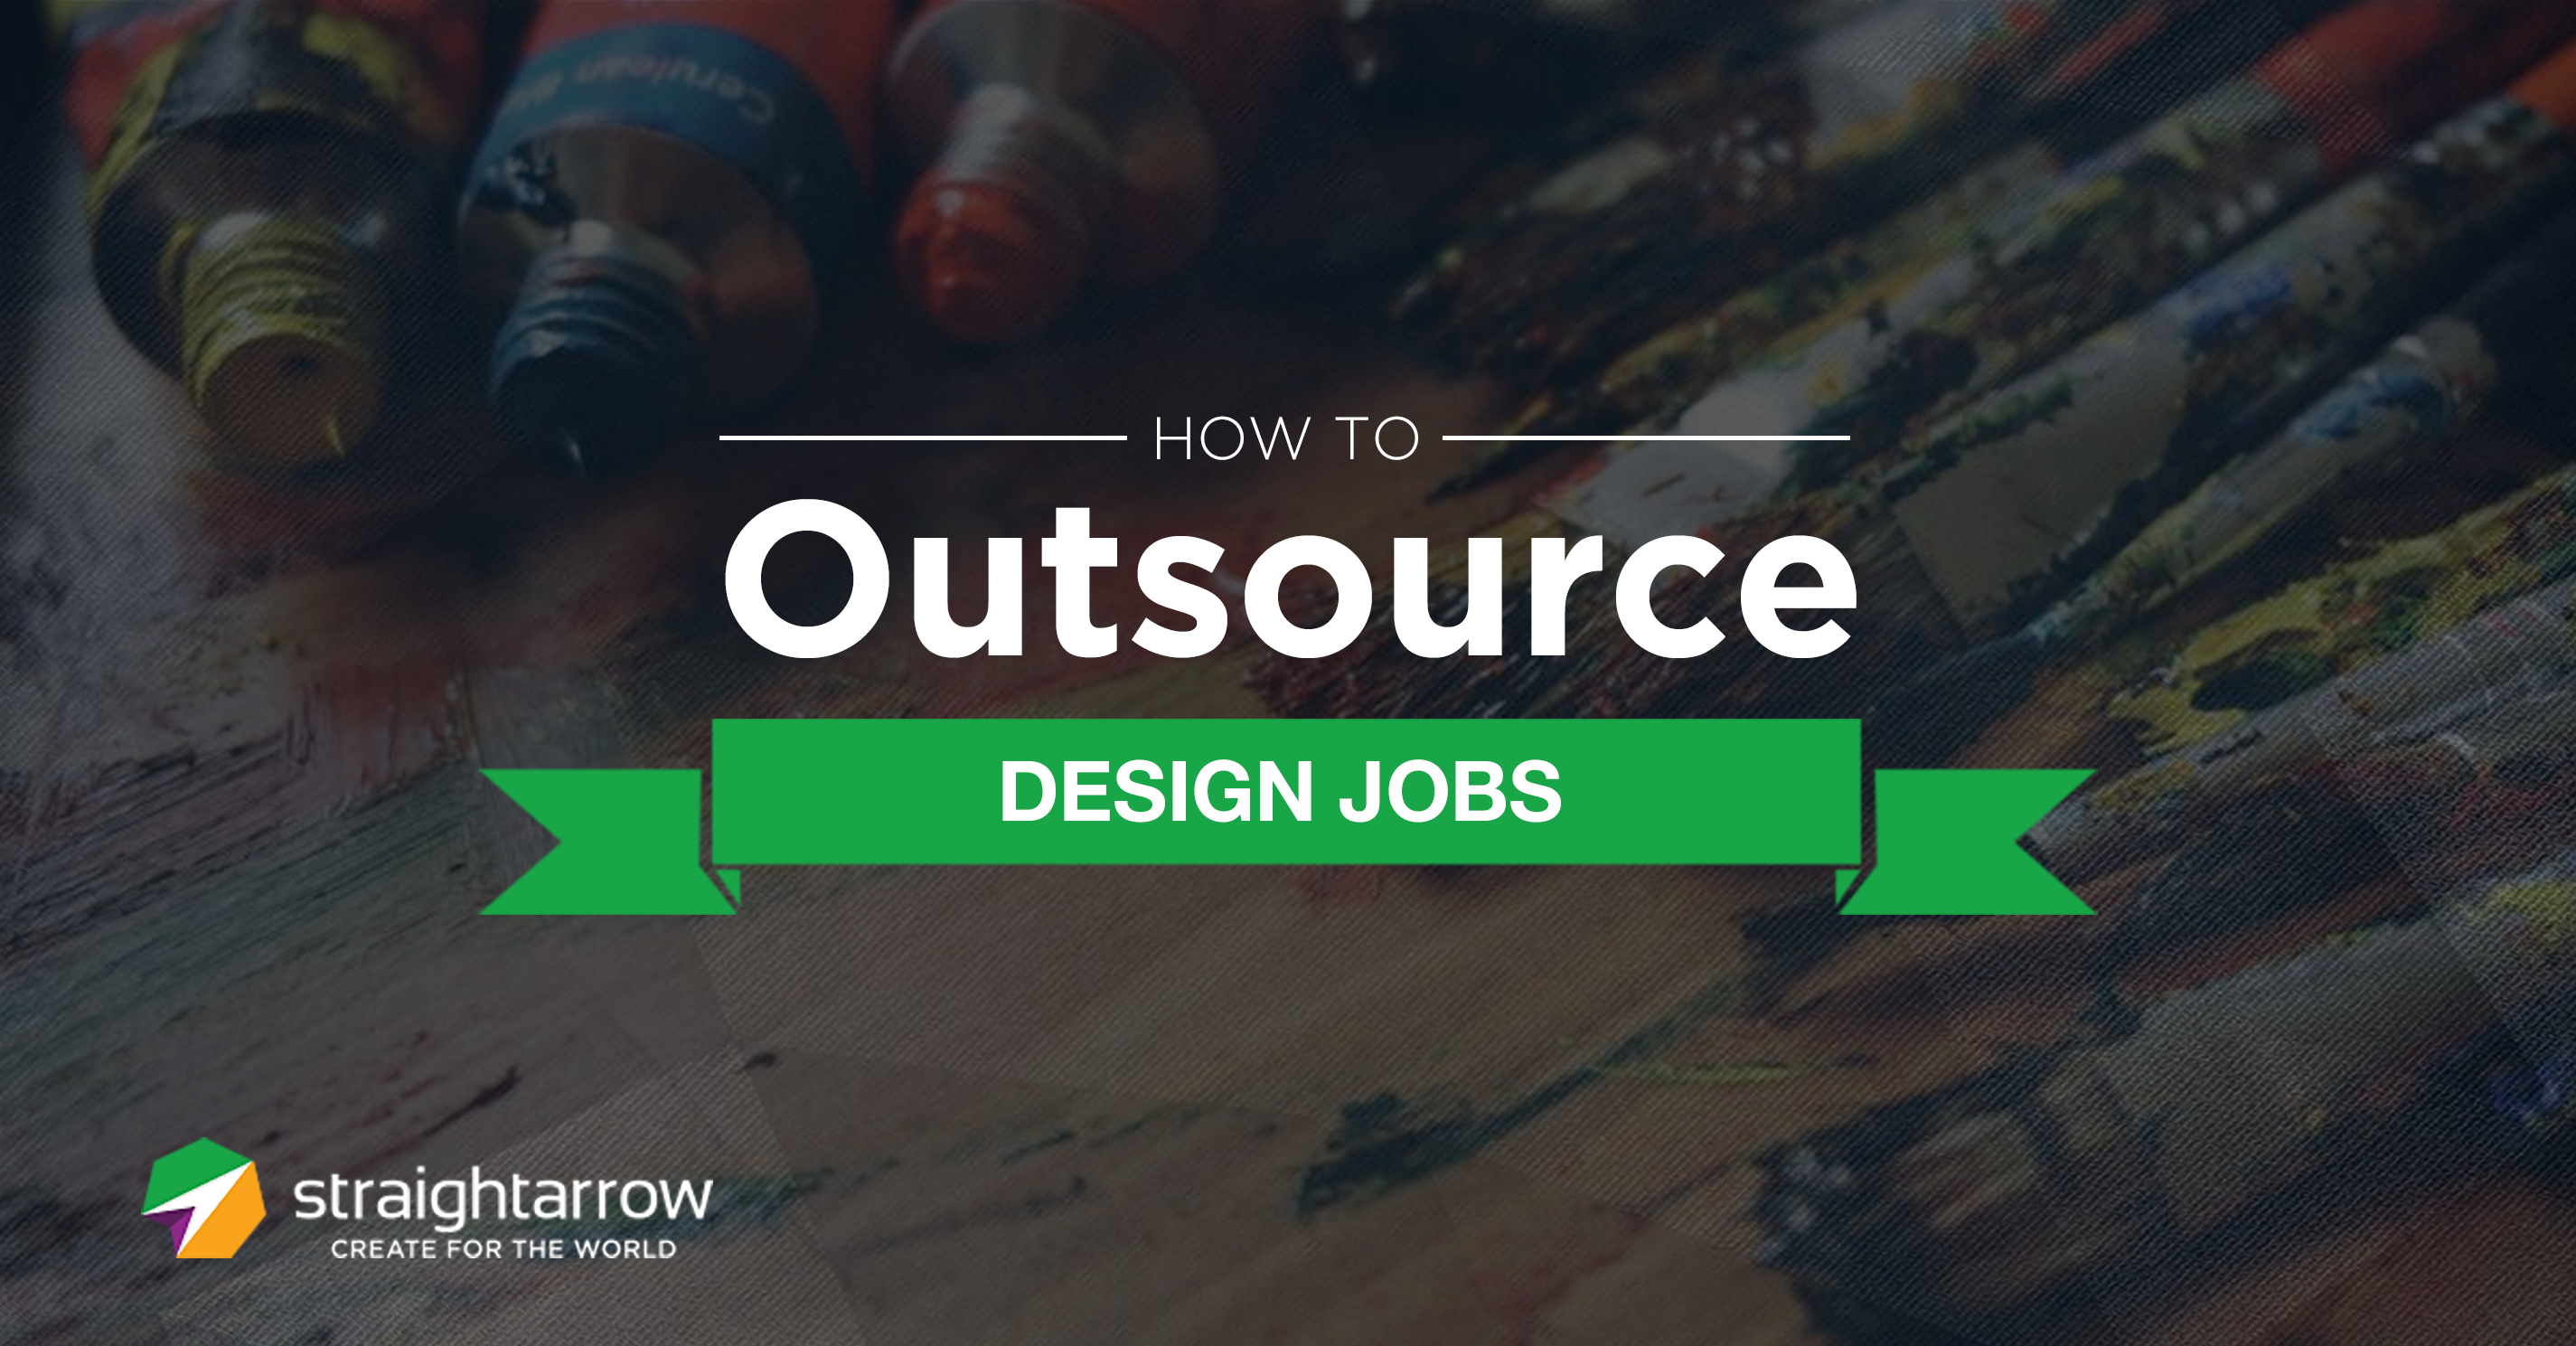 How to Outsource Design Jobs